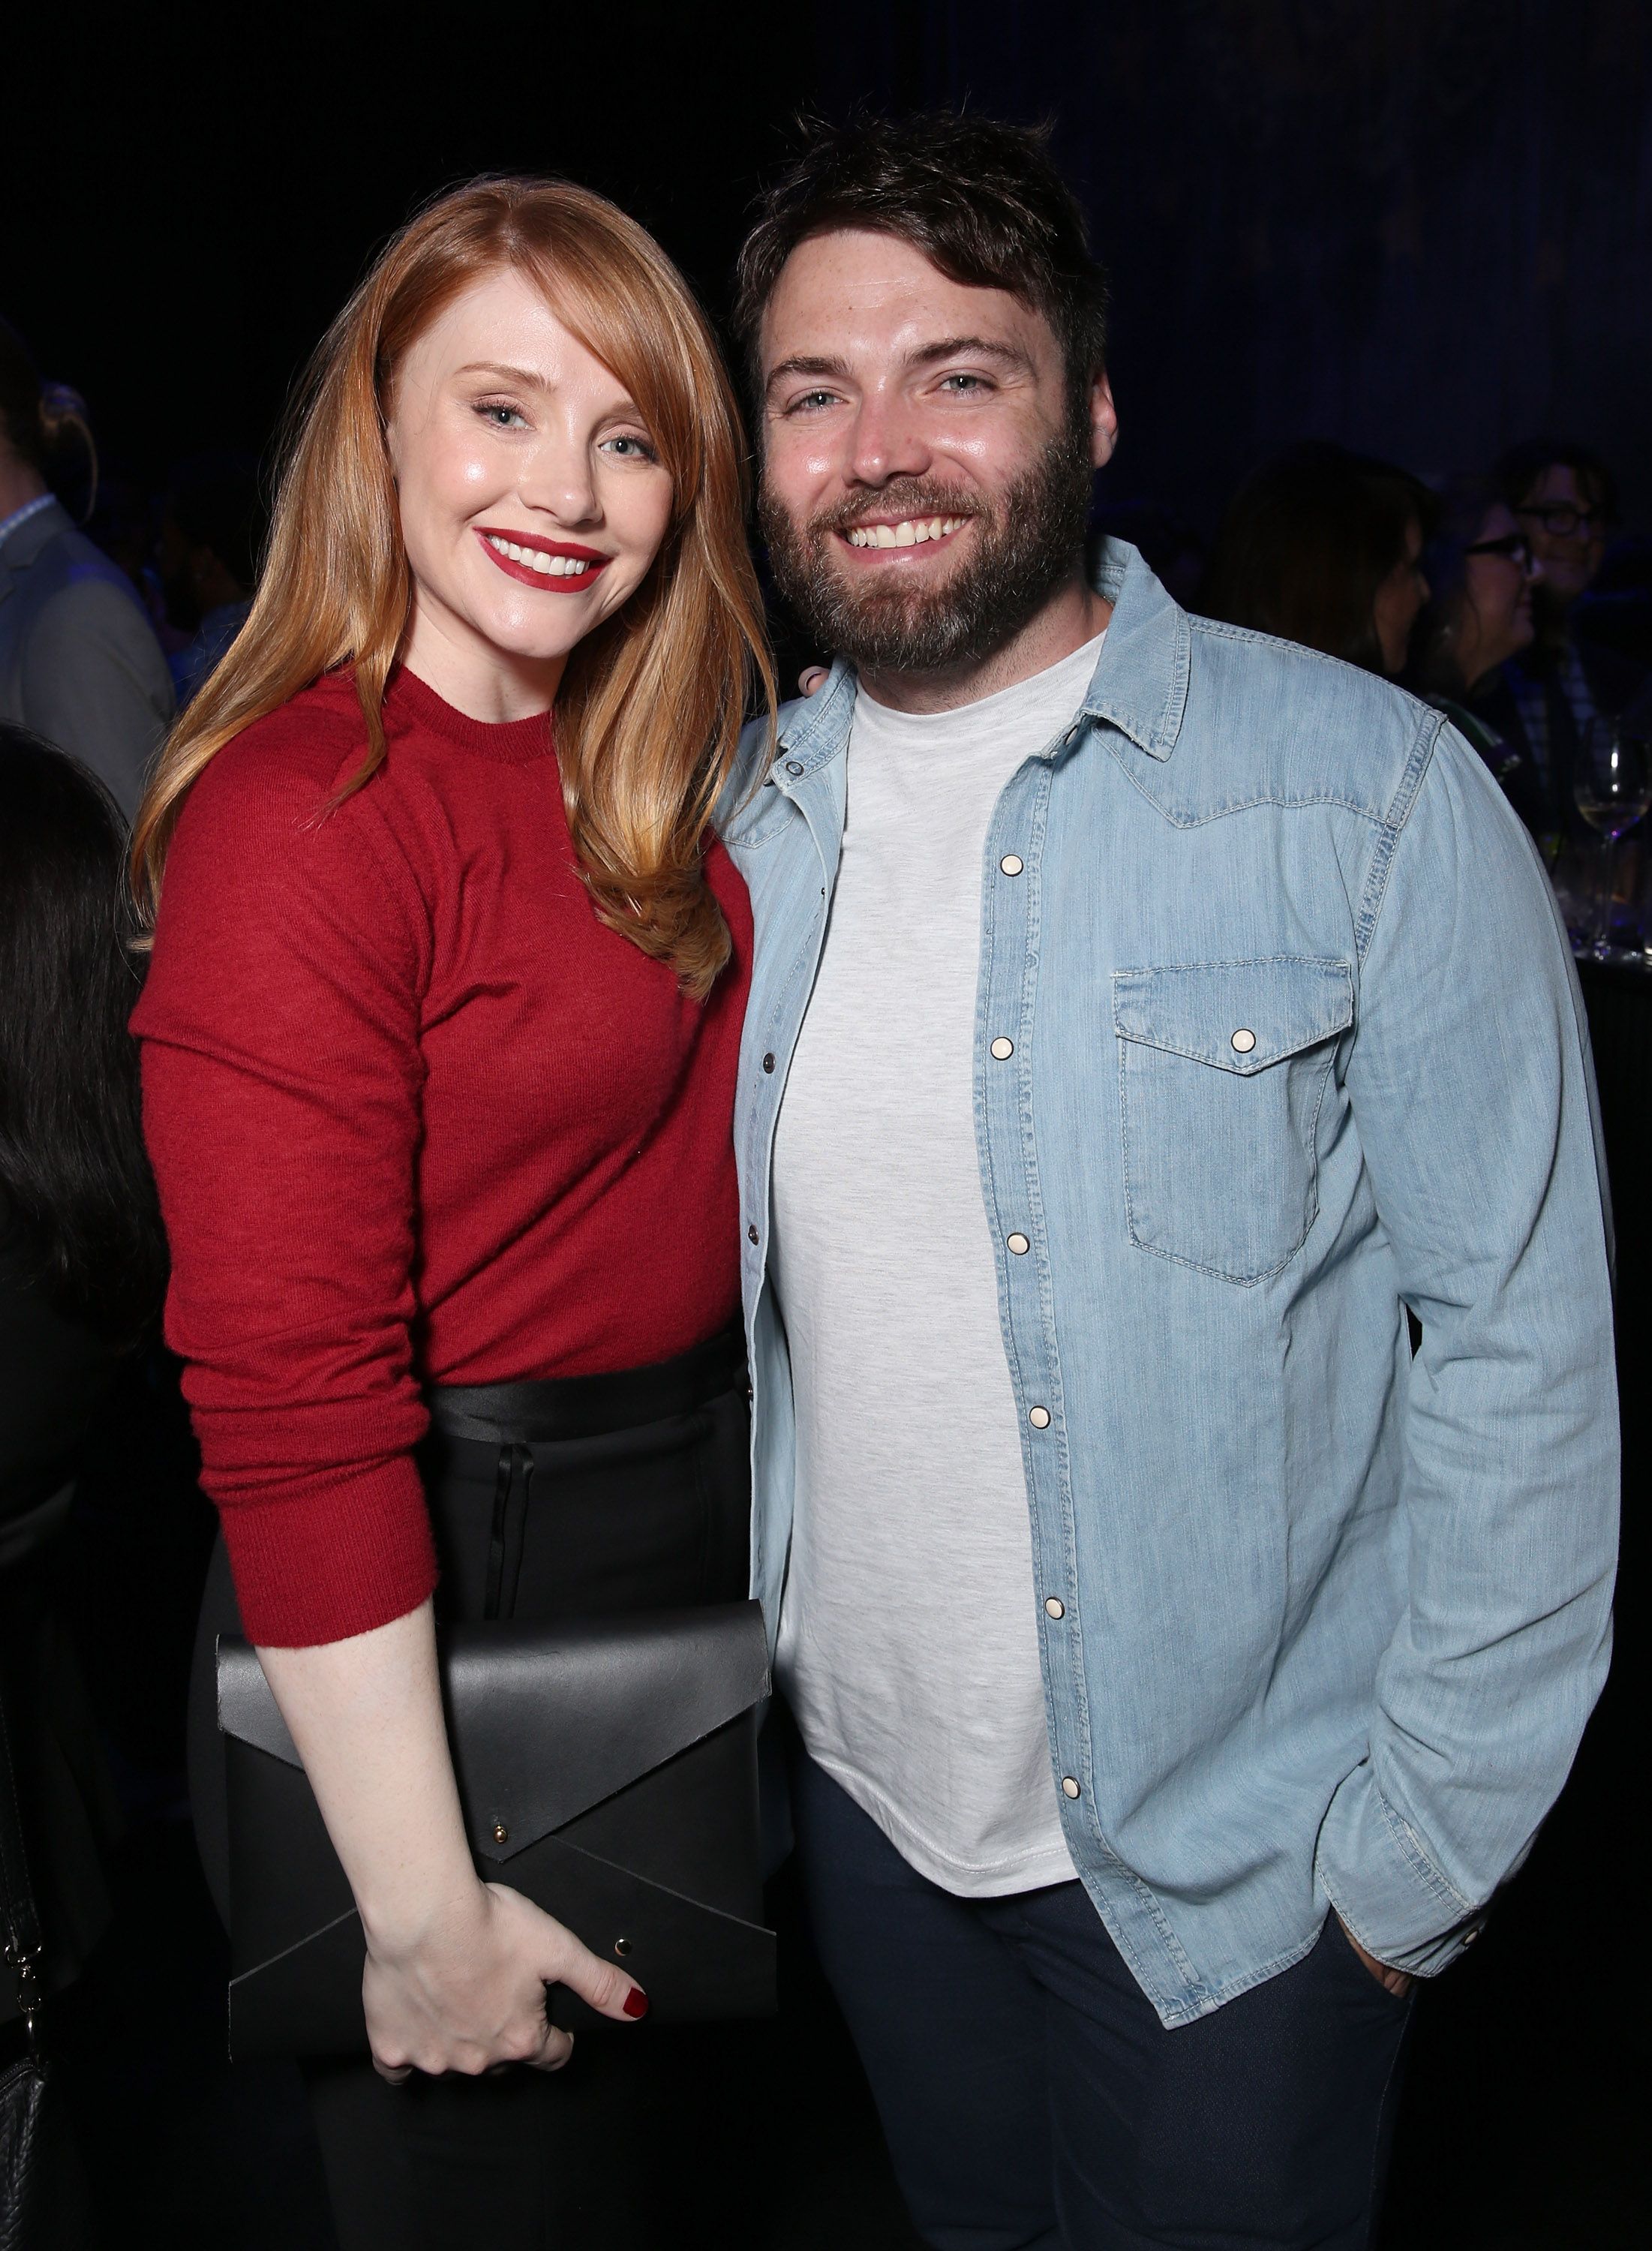 Bryce Dallas Howard and Seth Gabel during the Sundance Institute at The Theatre At The Ace Hotel on August 11, 2016 in Los Angeles, California. | Source: Getty Images